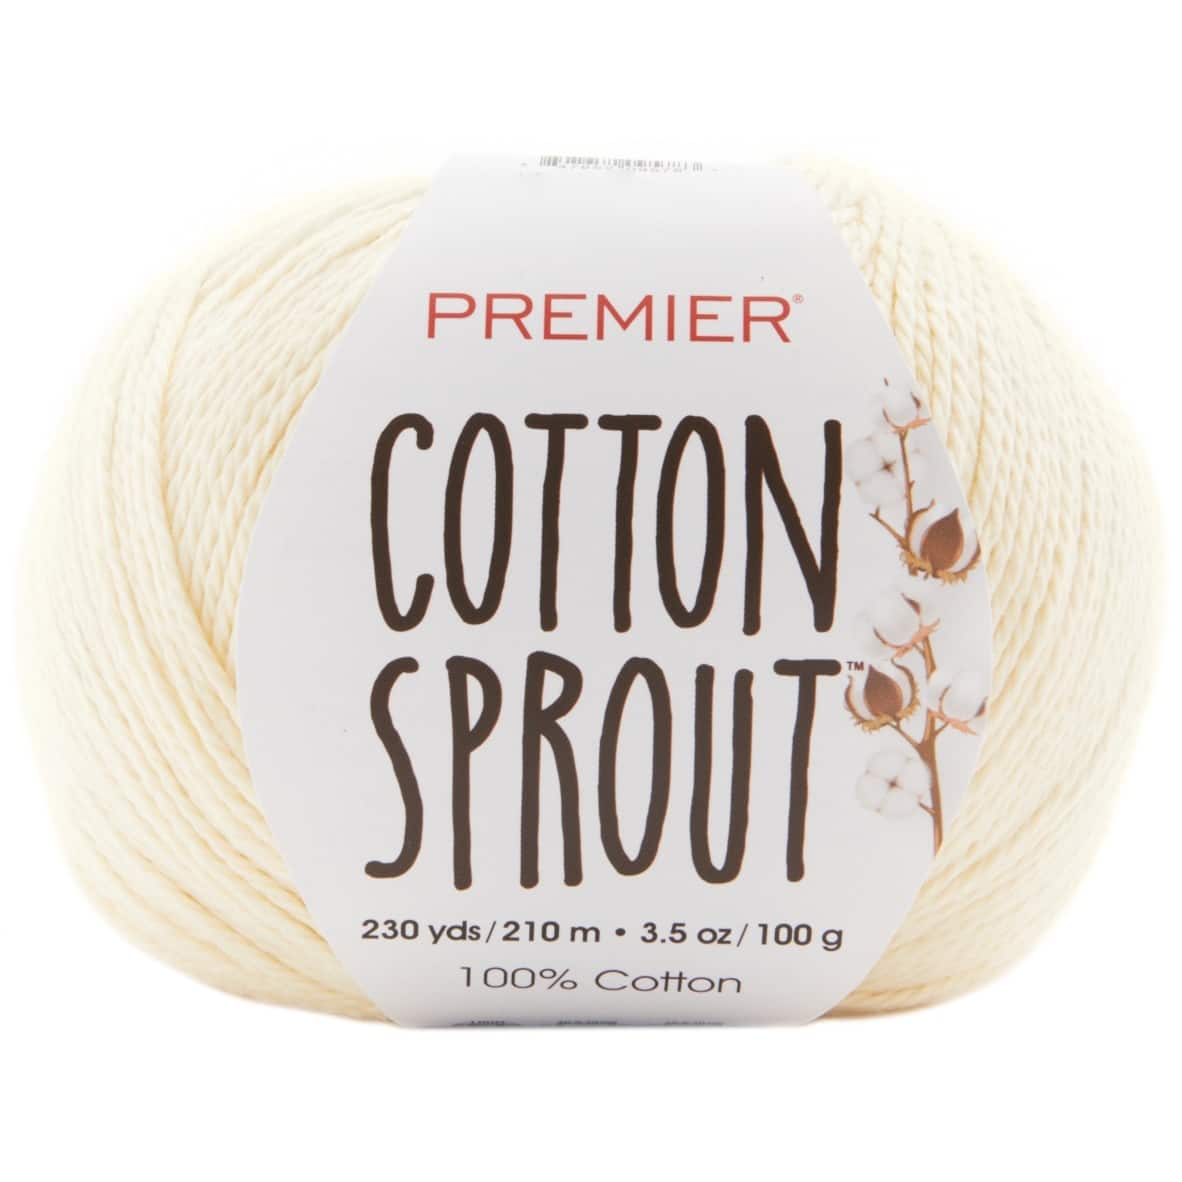 Premier Yarns Cotton Sprout DK, Natural Cotton Yarn, Machine-Washable, DK  Yarn for Crocheting and Knitting, Cranberry, 3.5 oz, 230 Yards